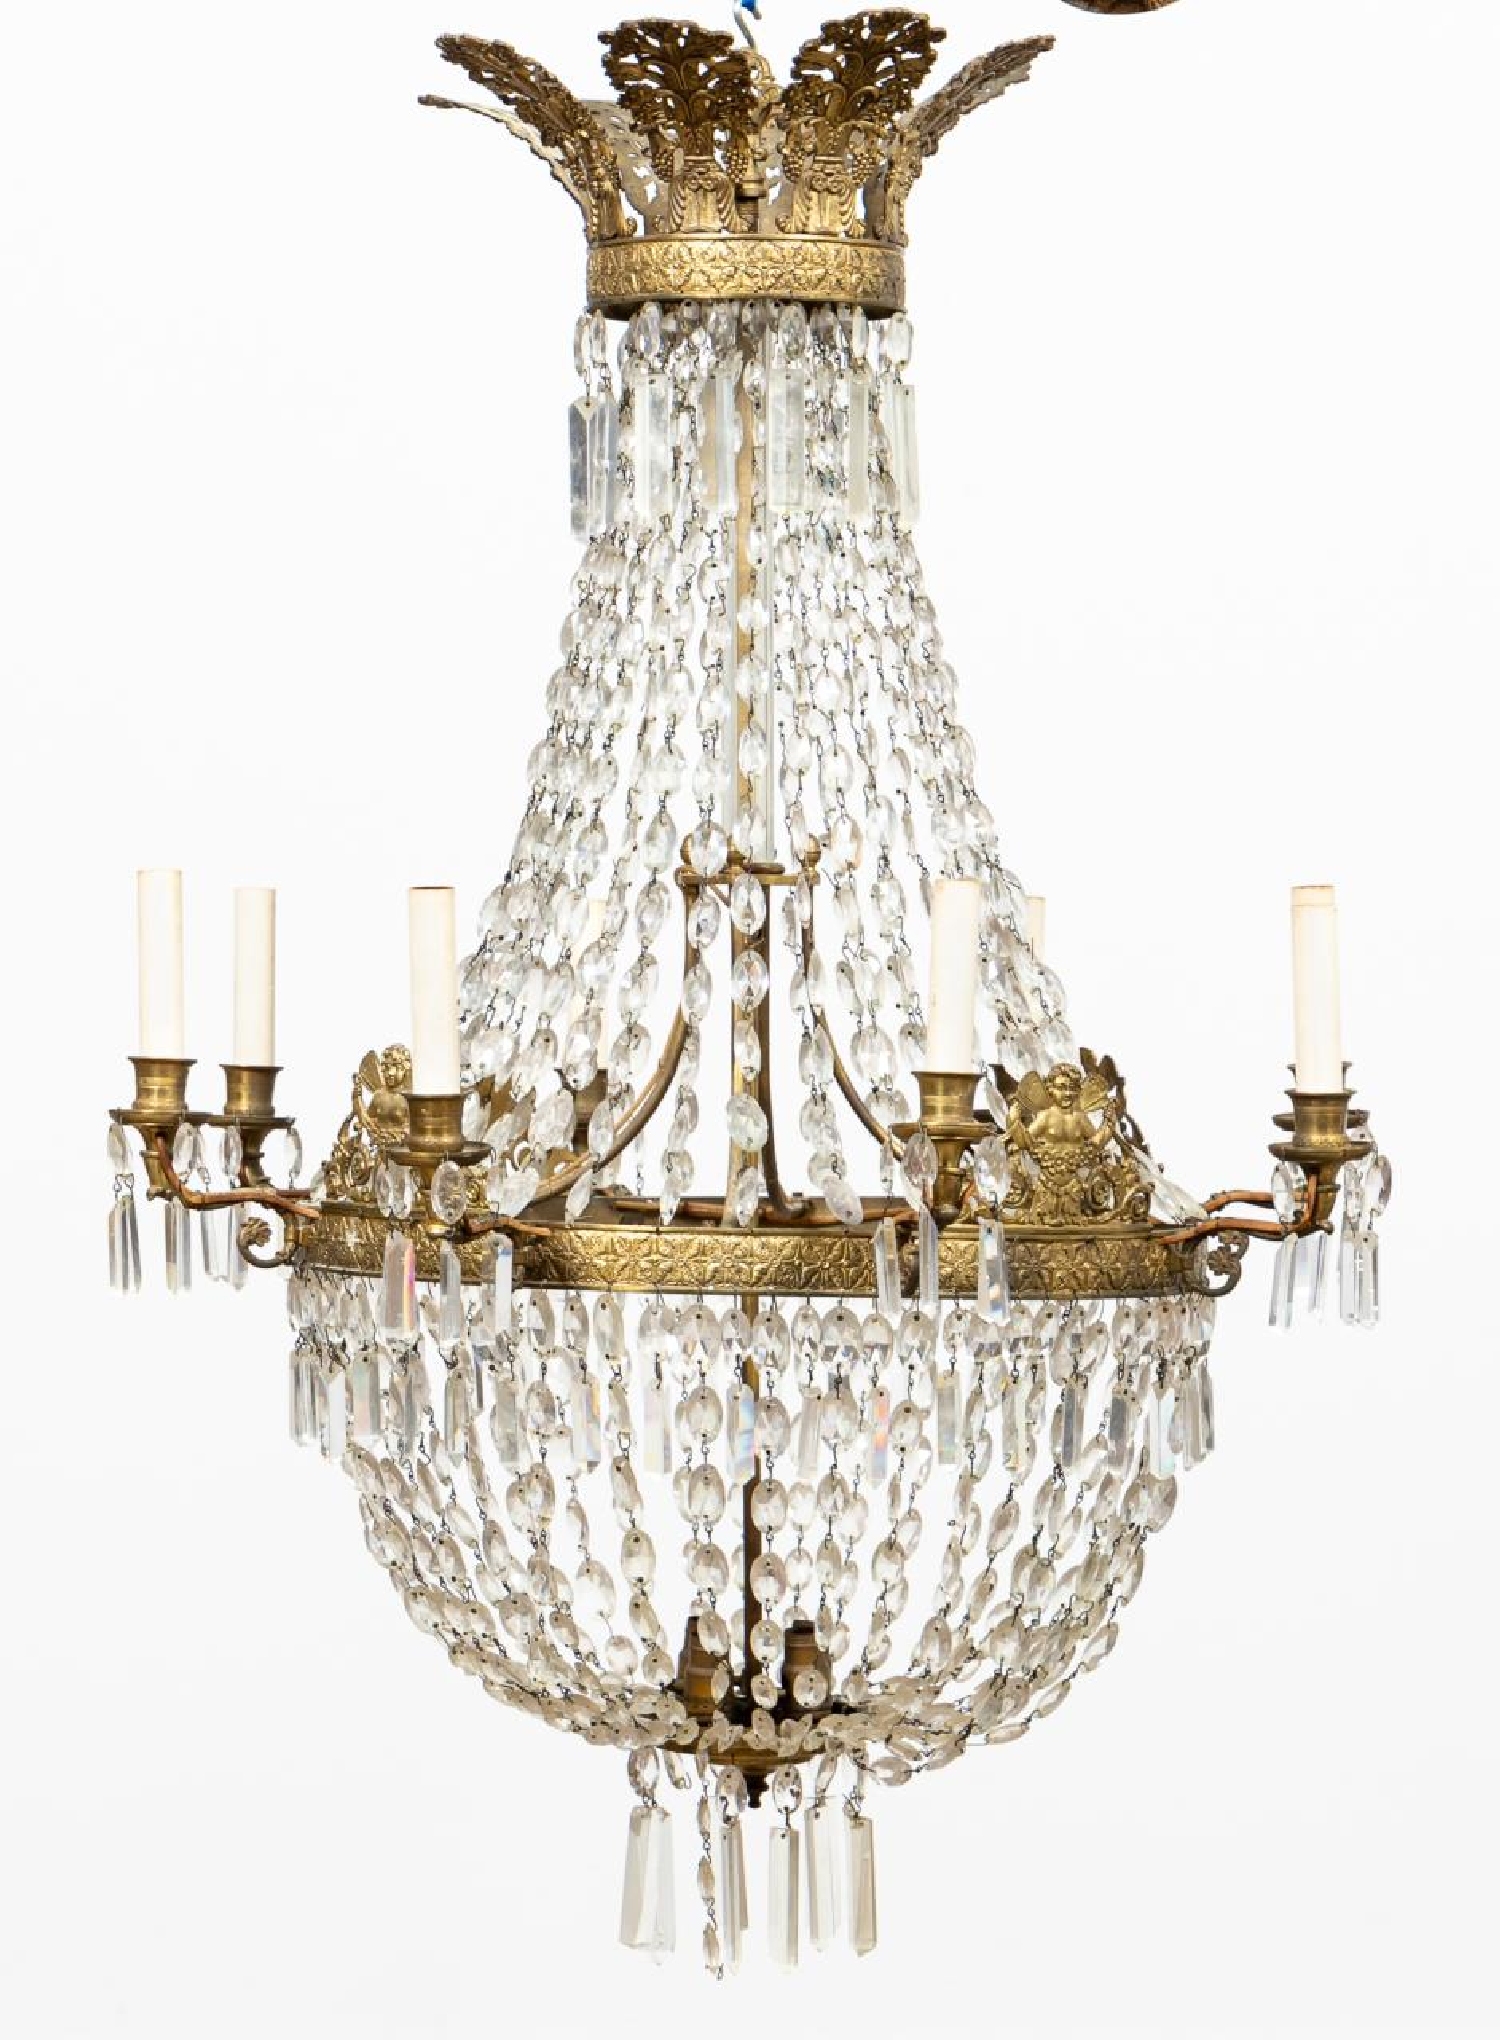 PR. EMPIRE STYLE GILT & CRYSTAL BASKET CHANDELIERS - Image 5 of 7